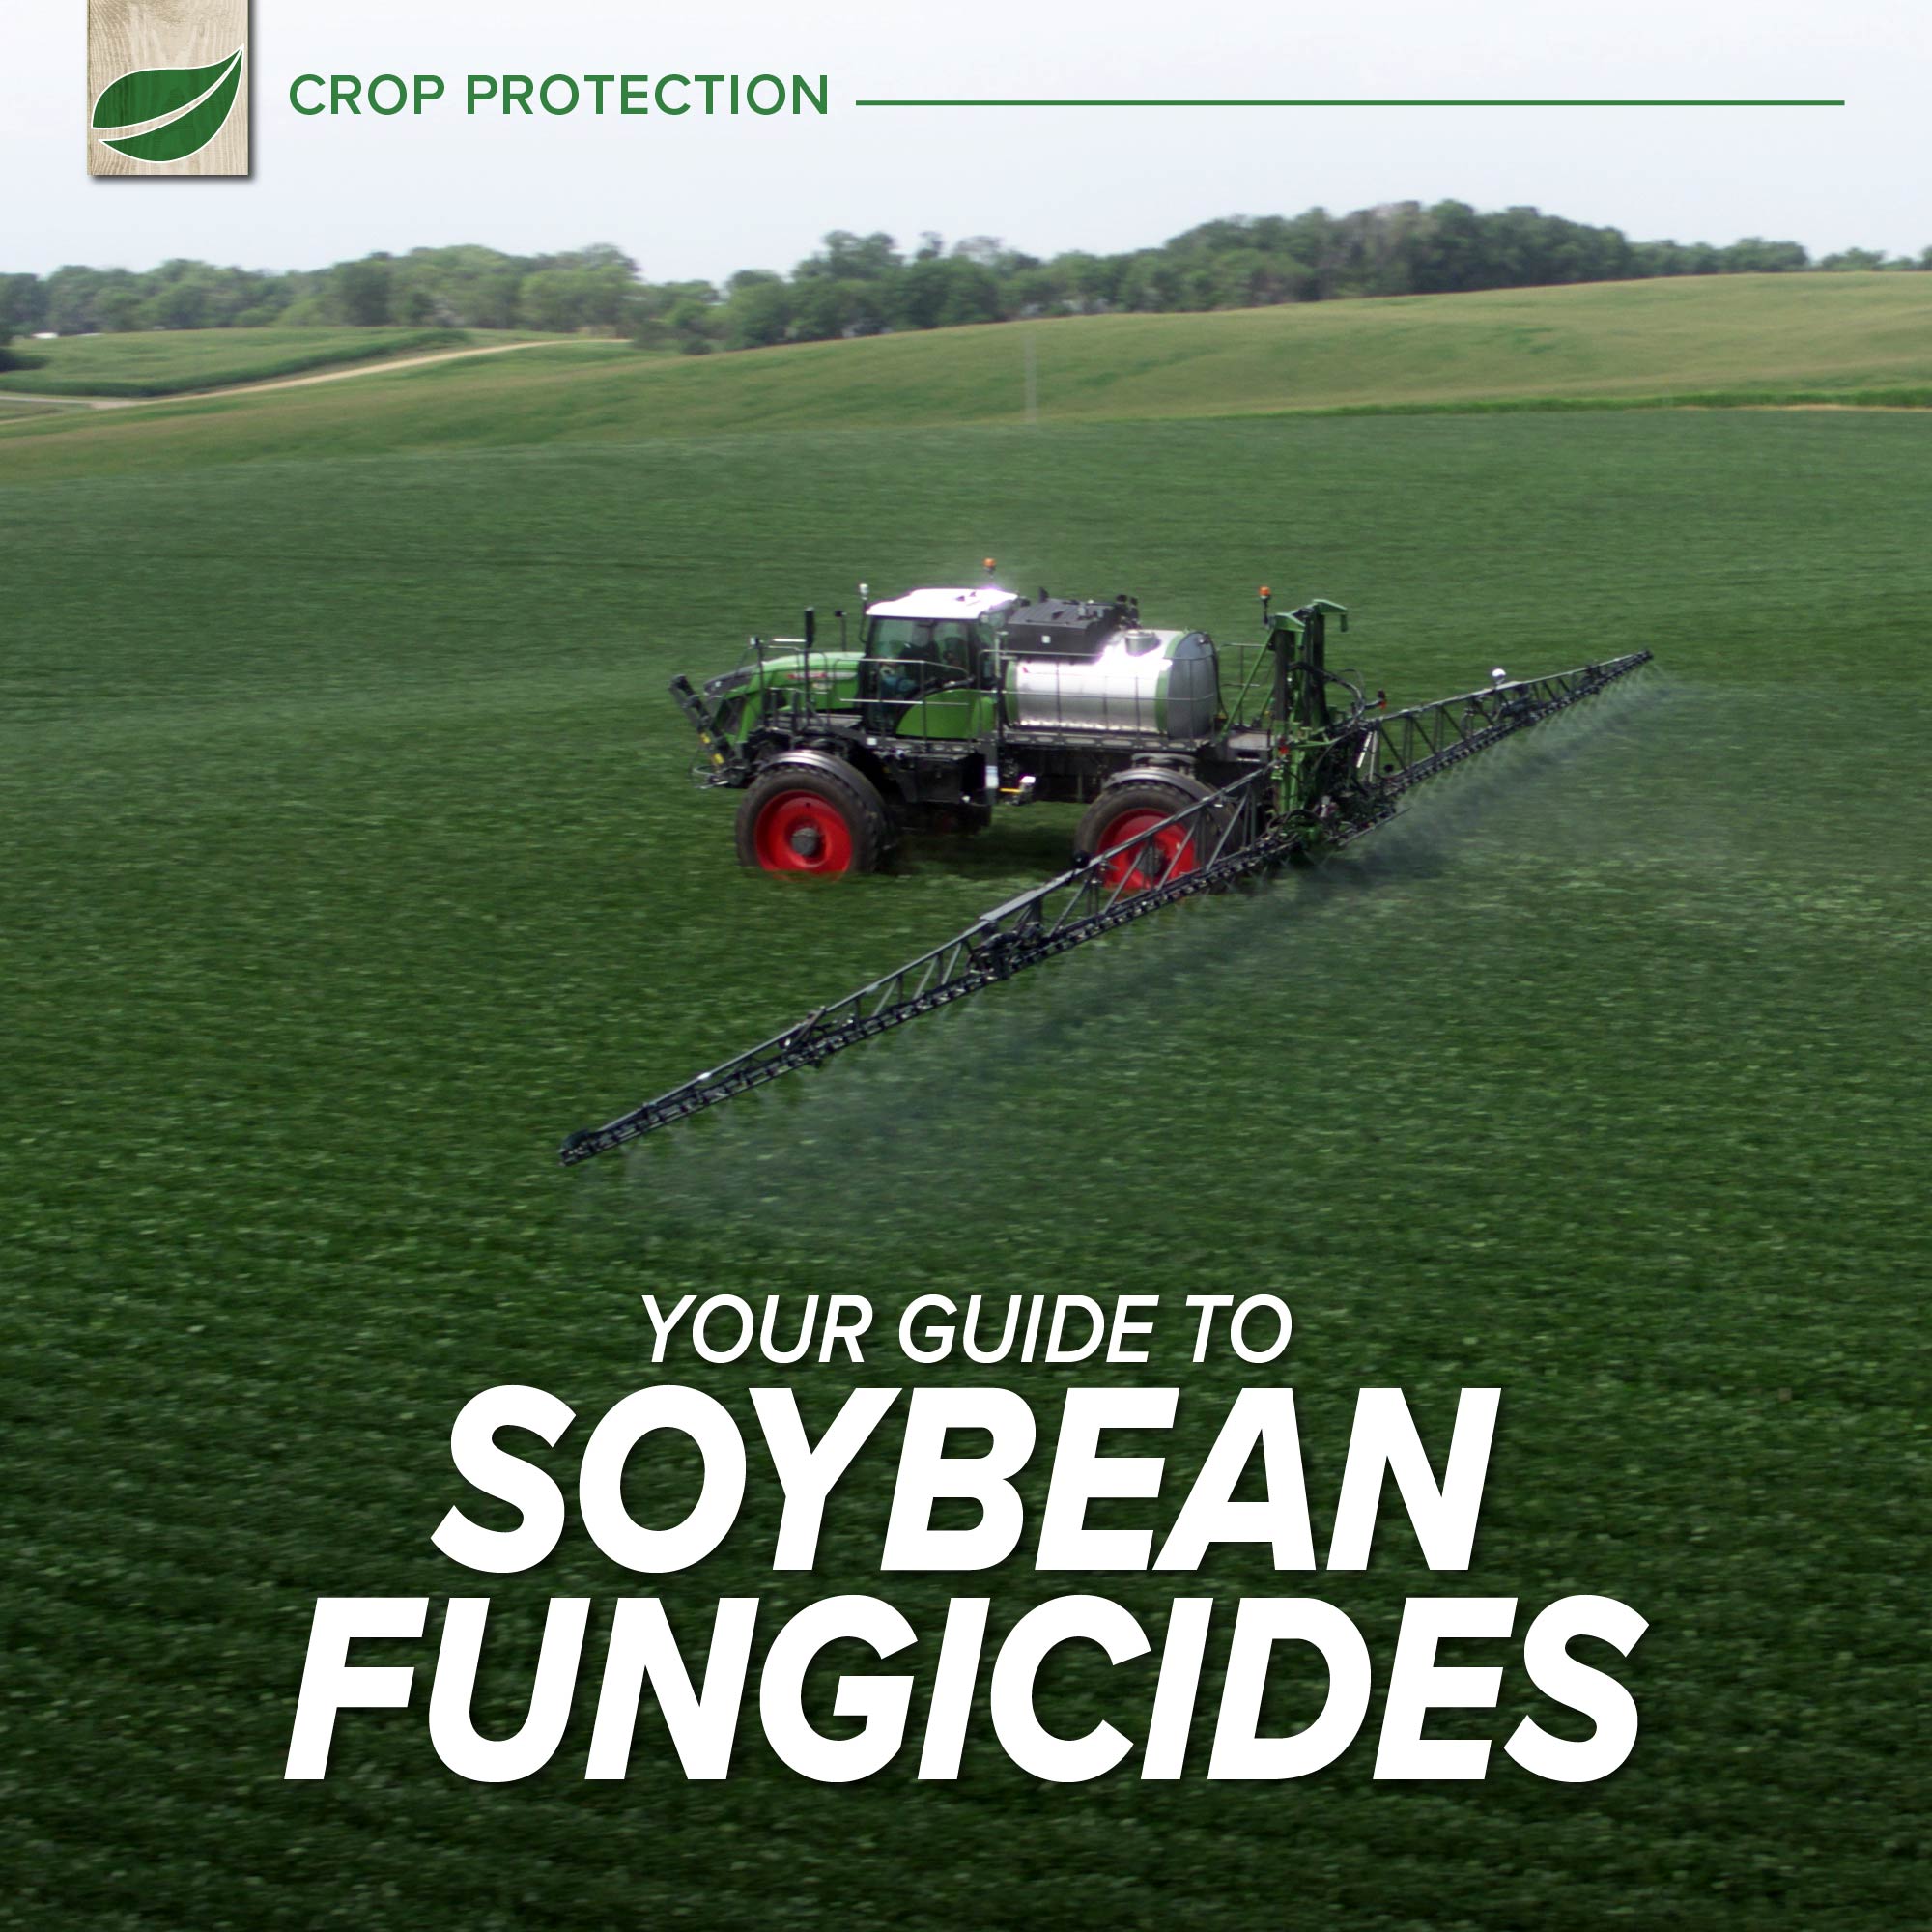 Your Guide to Soybean Fungicides